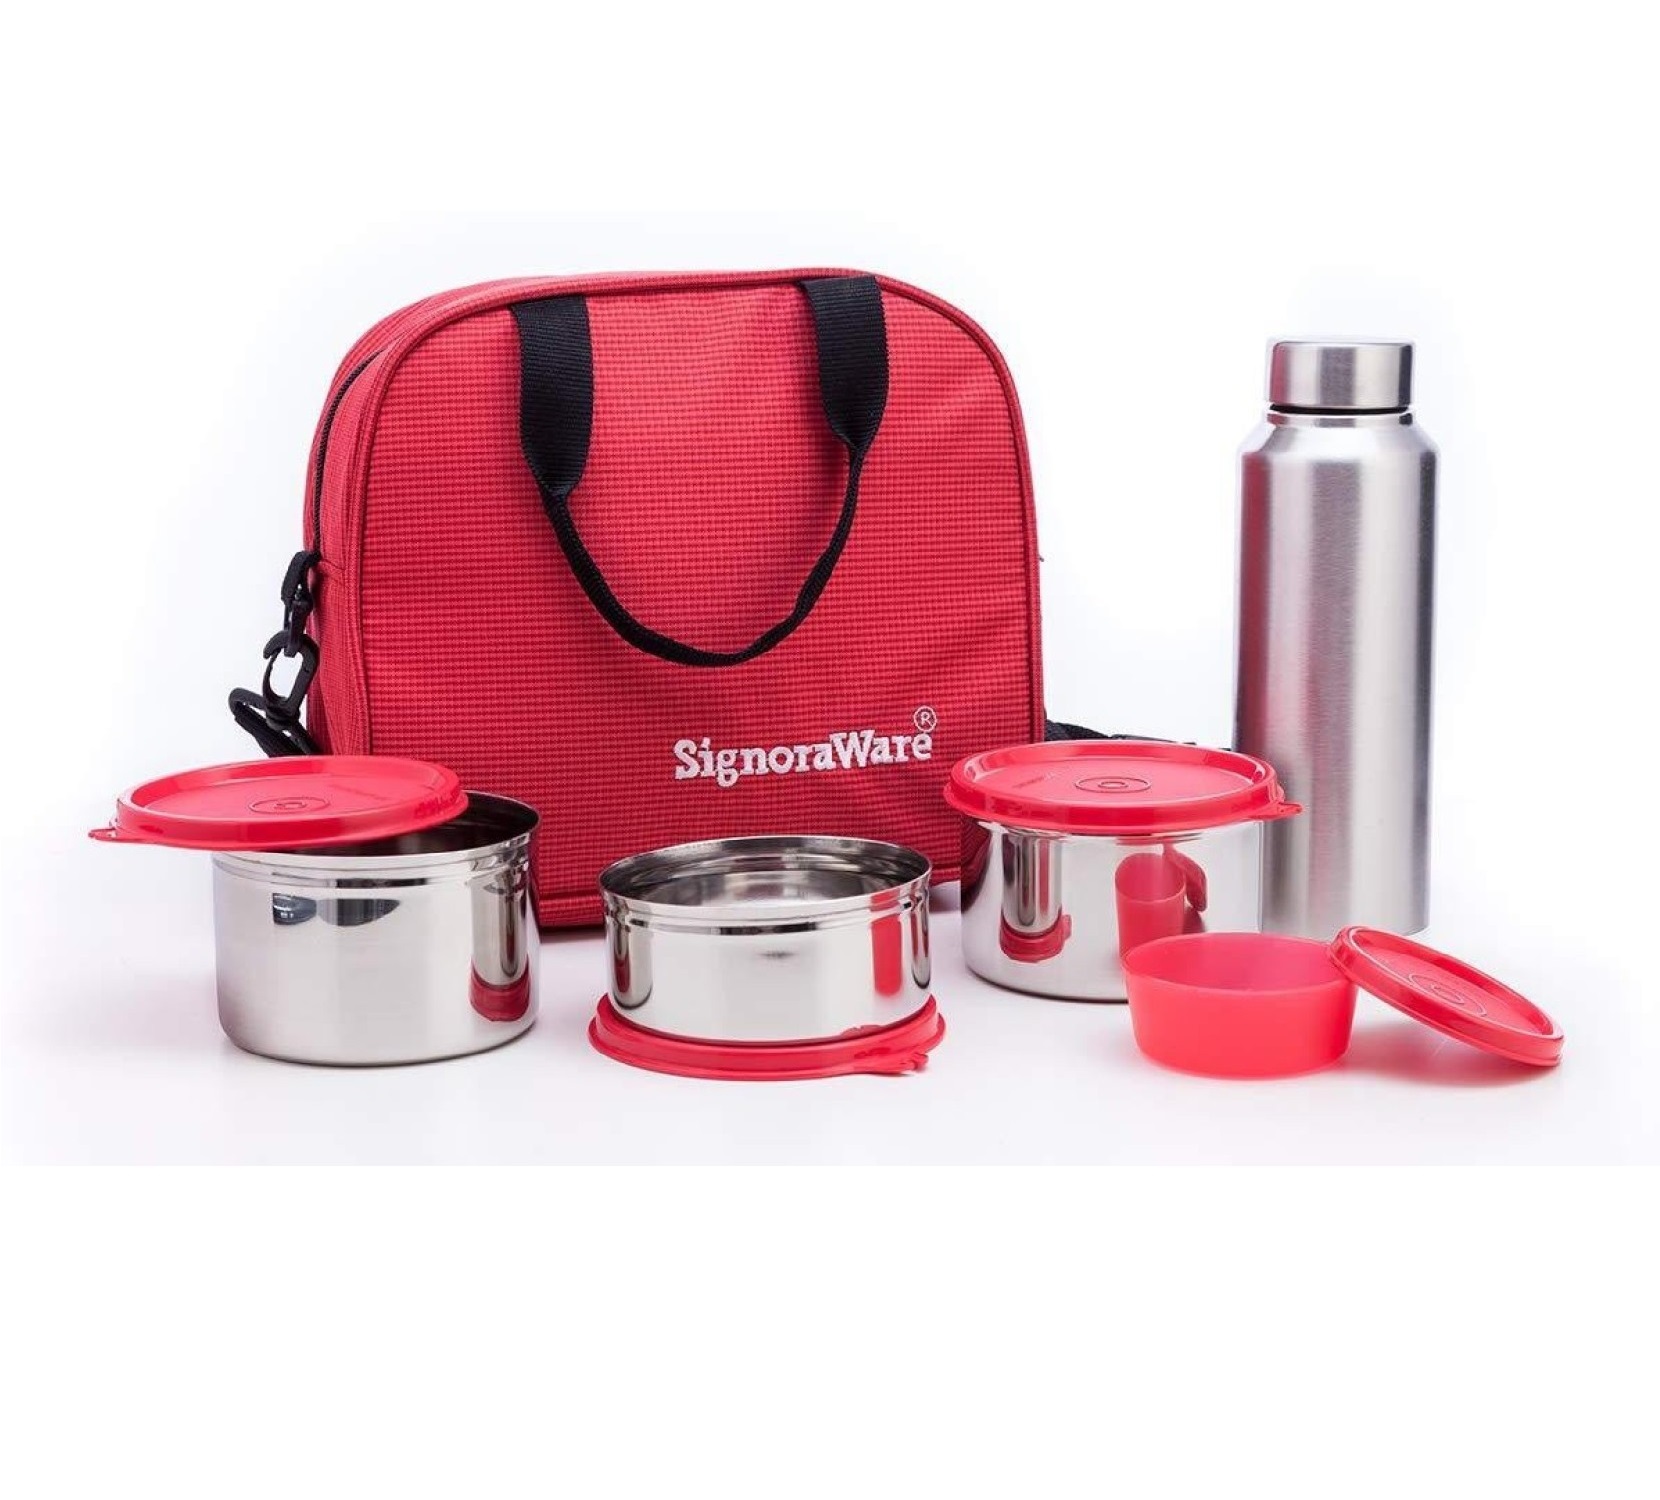 Signoraware Sling Bag Lunch Box 4 Containers & Water Bottle